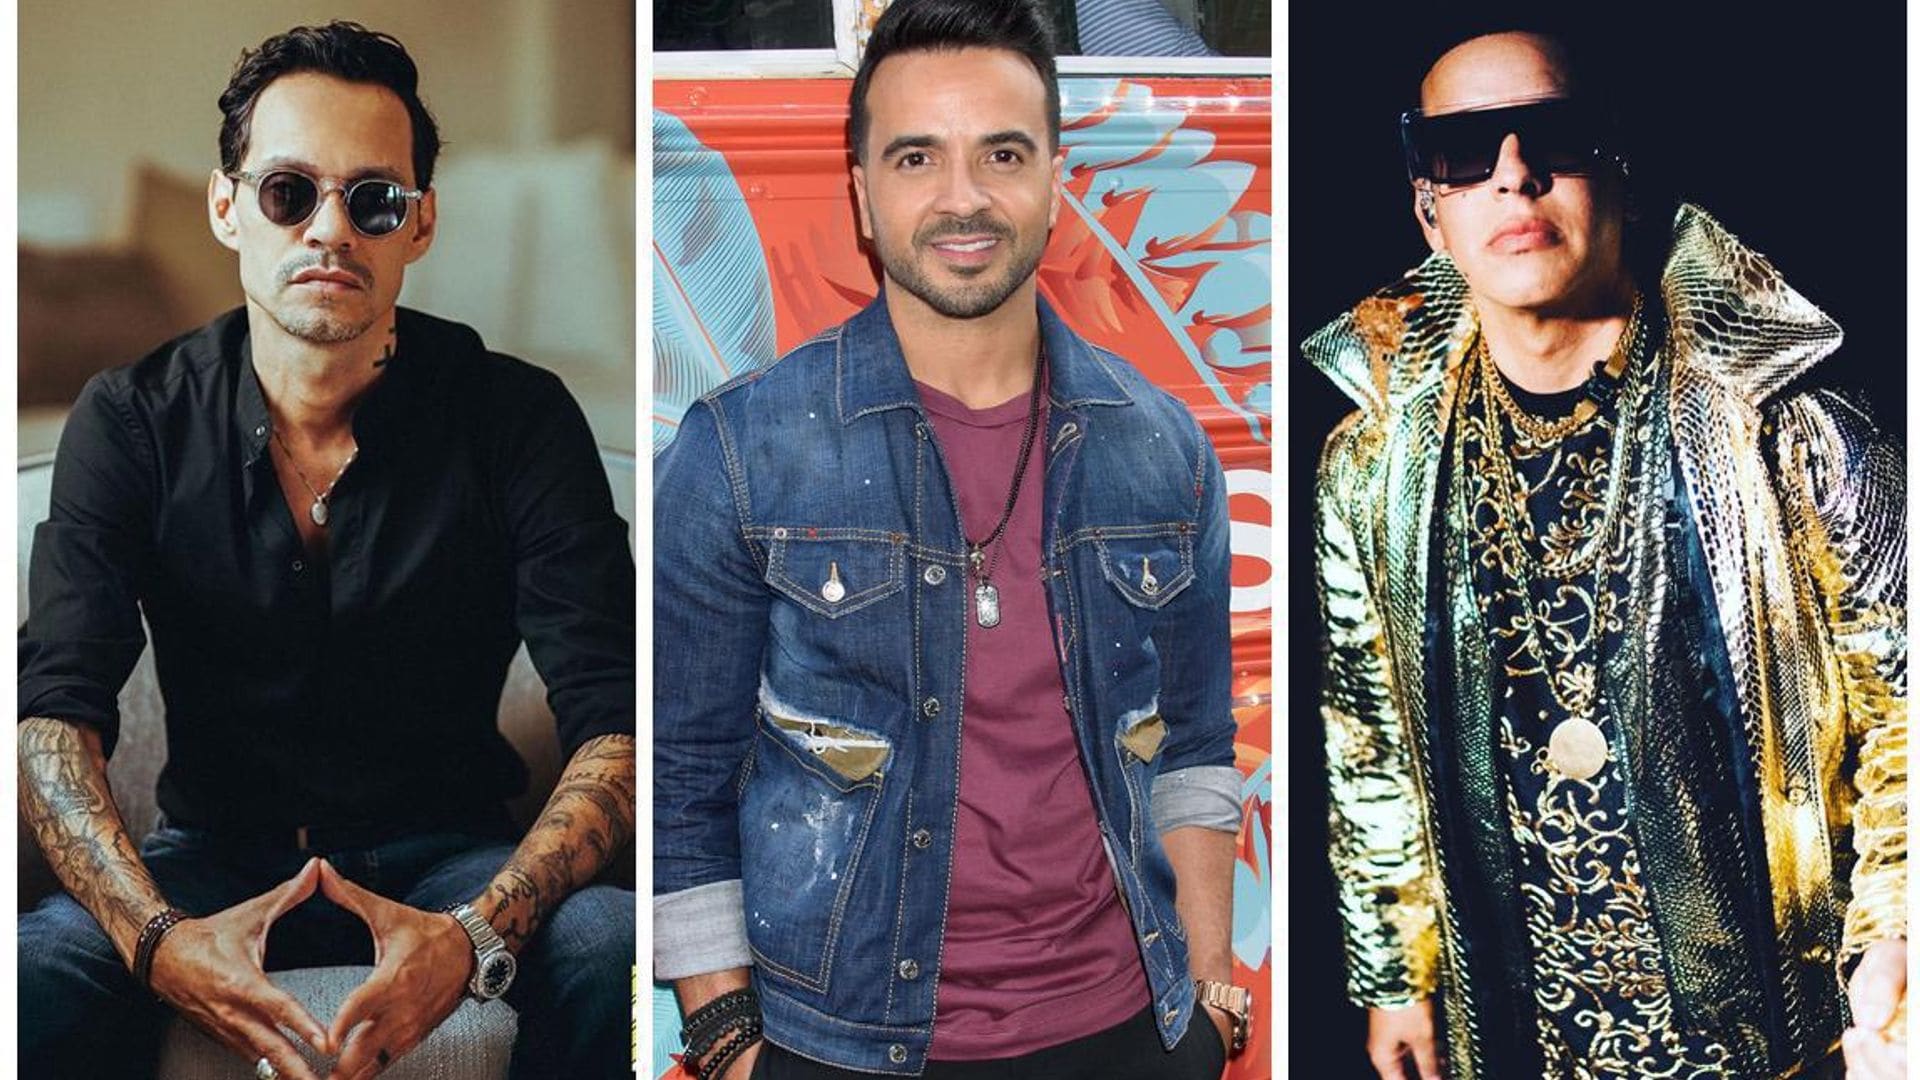 Marc Anthony, Luis Fonsi and more come together in wake of Puerto Rico’s devastating earthquake